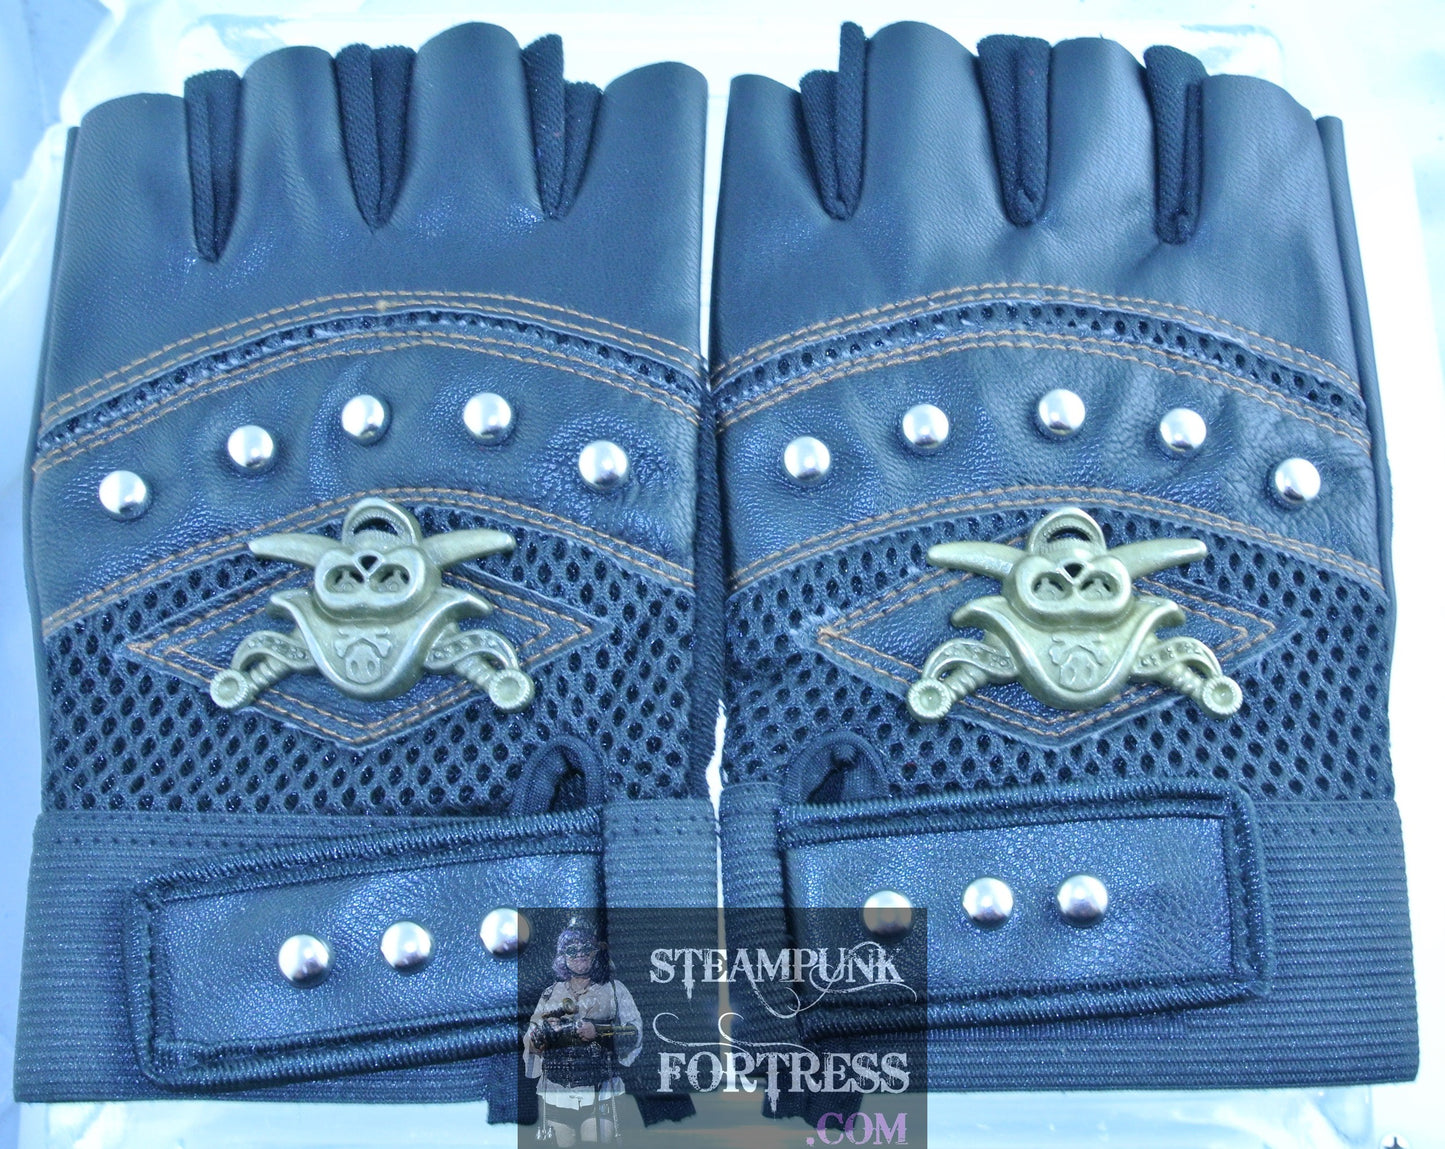 BLACK FAUX LEATHER VEGAN BRASS PIRATE CROSSED SWORDS SILVER STUDS FINGERLESS GLOVES 80S COSPLAY COSTUME HALLOWEEN- MASS PRODUCED